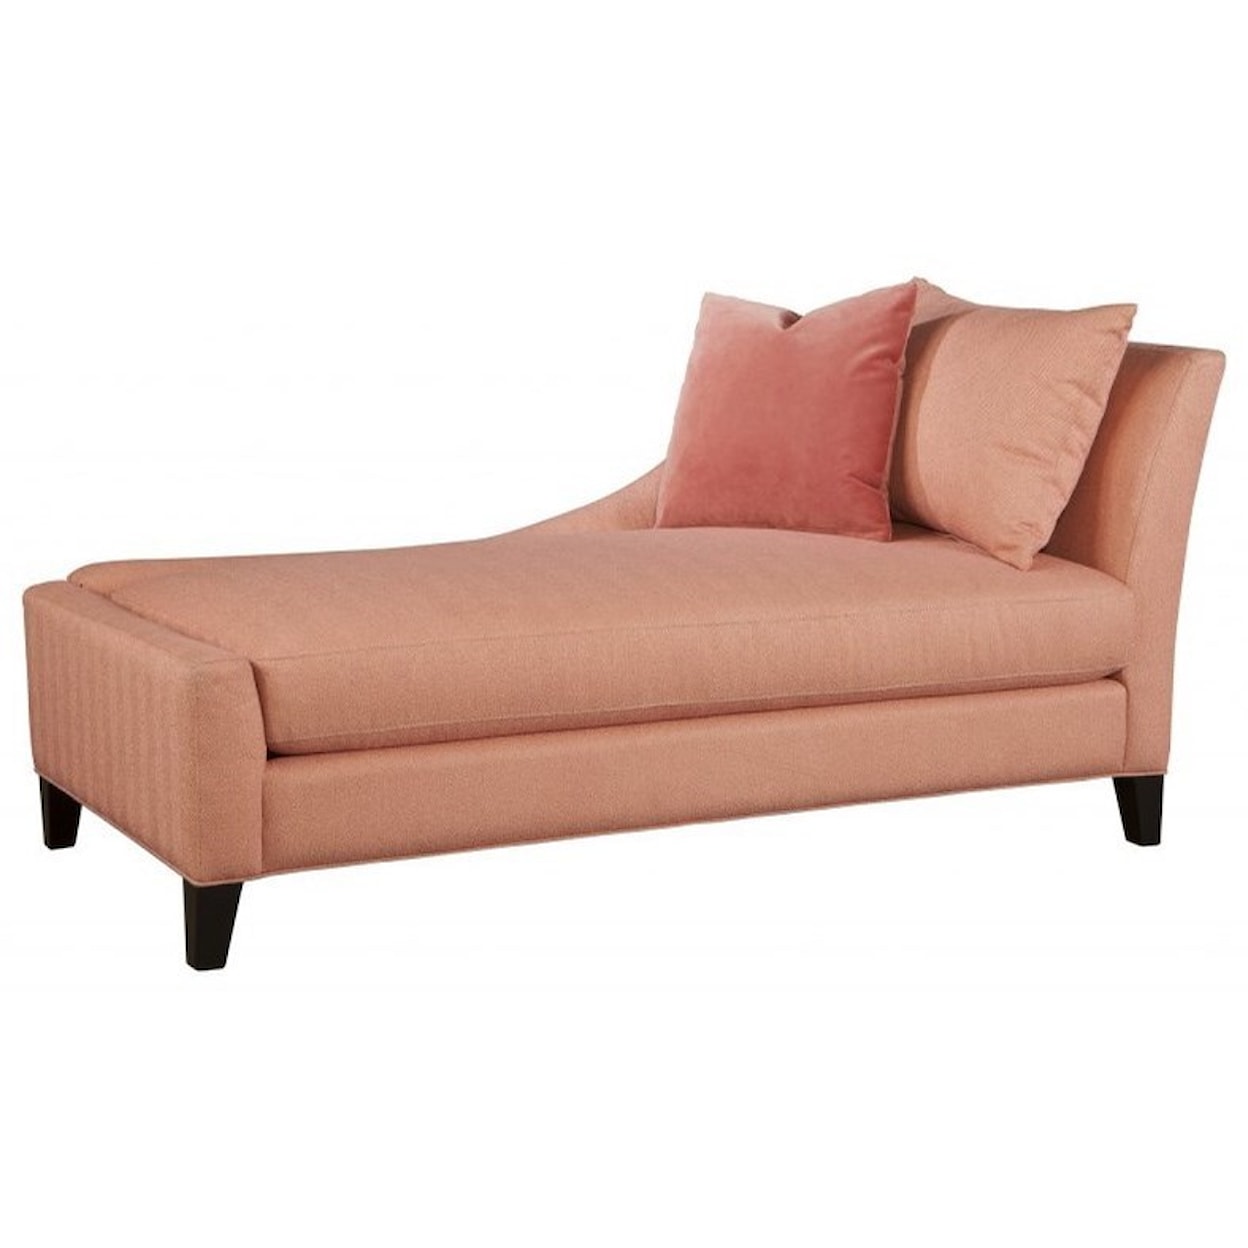 Jonathan Louis Accentuates Carraway LAF Chaise